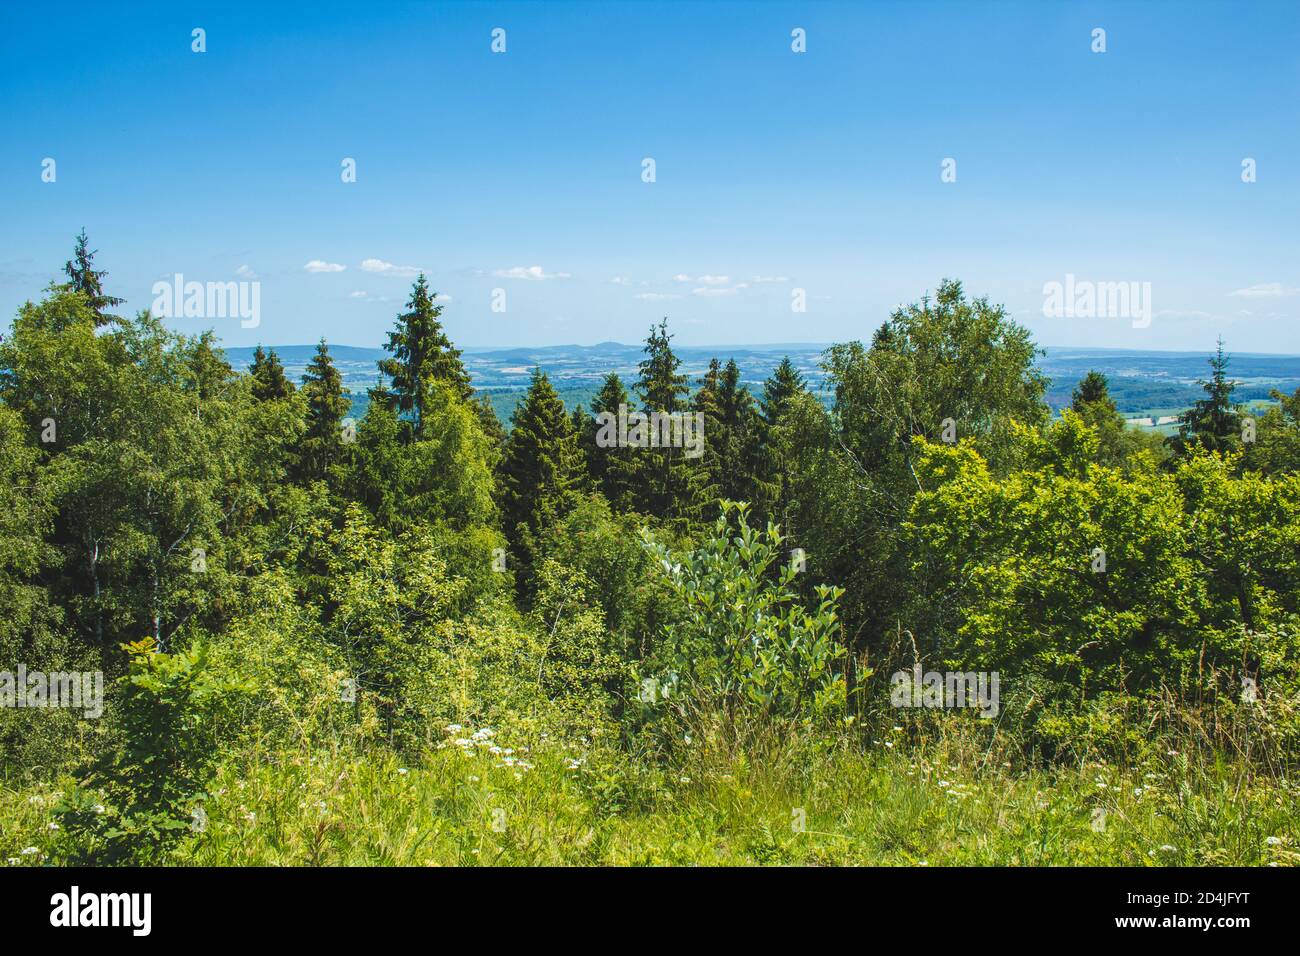 Teutoburg Forest. View of landscape at Teutoburg Forest / Egge Hills Nature Park. View from Velmerstot hill in North Rhine Westphalia, Germany Stock Photo